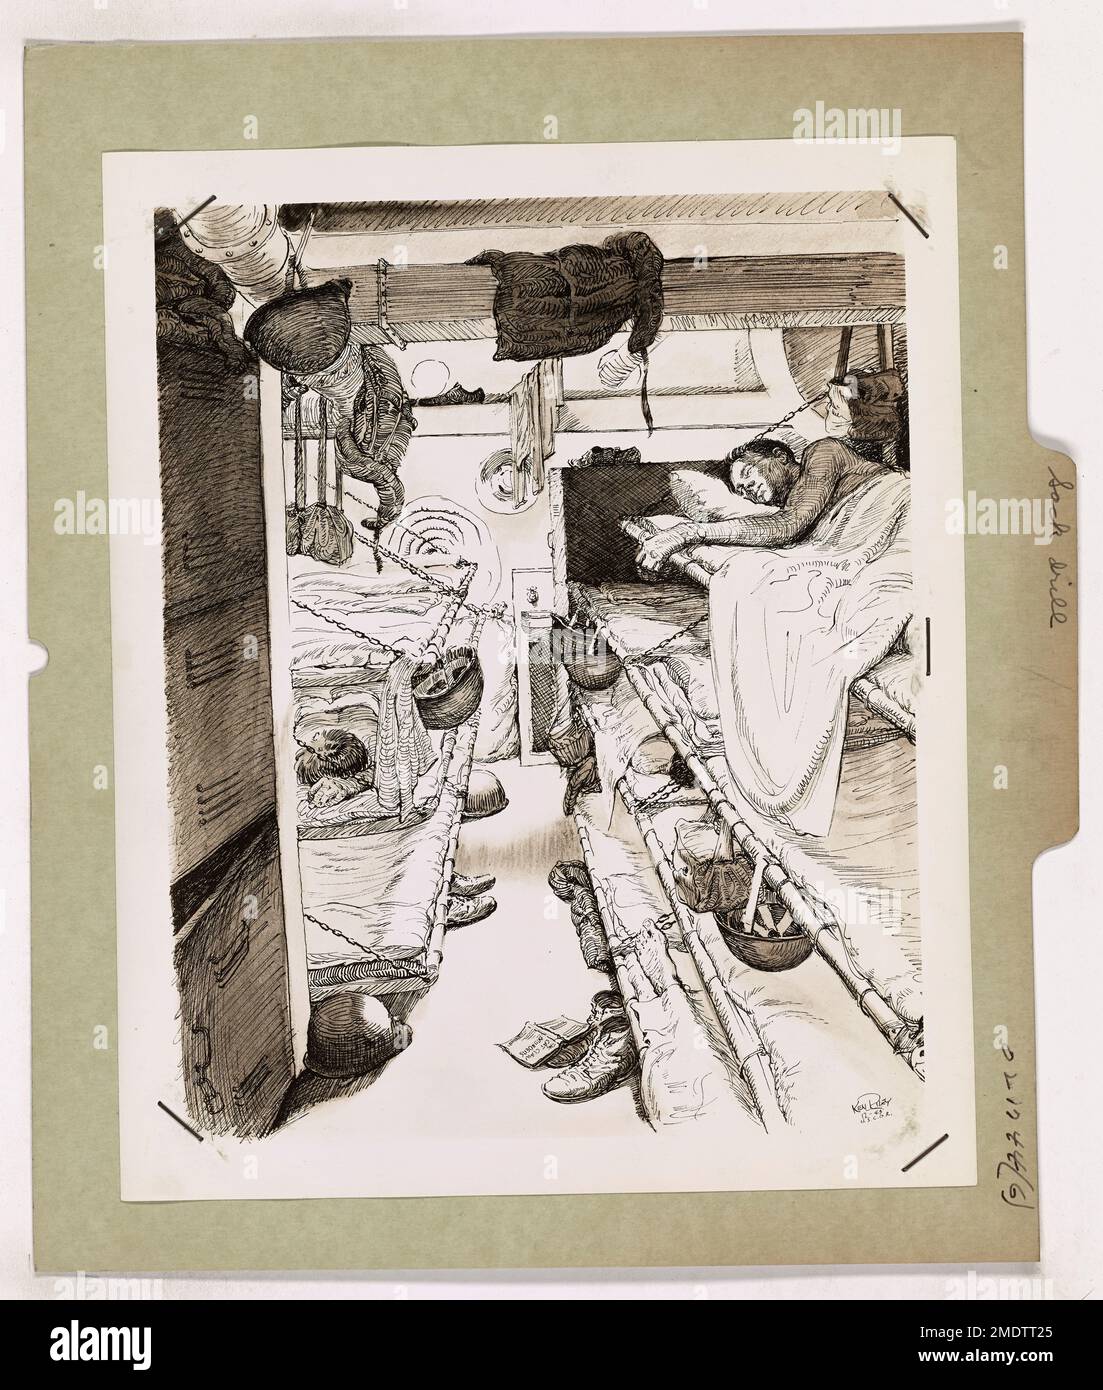 Sack Drill. This image depicts Coast Guardsmen sleeping while off duty aboard a Coast Guard-manned transport, drawn by Coast Guard Combat Artist Ken Riley. Stock Photo